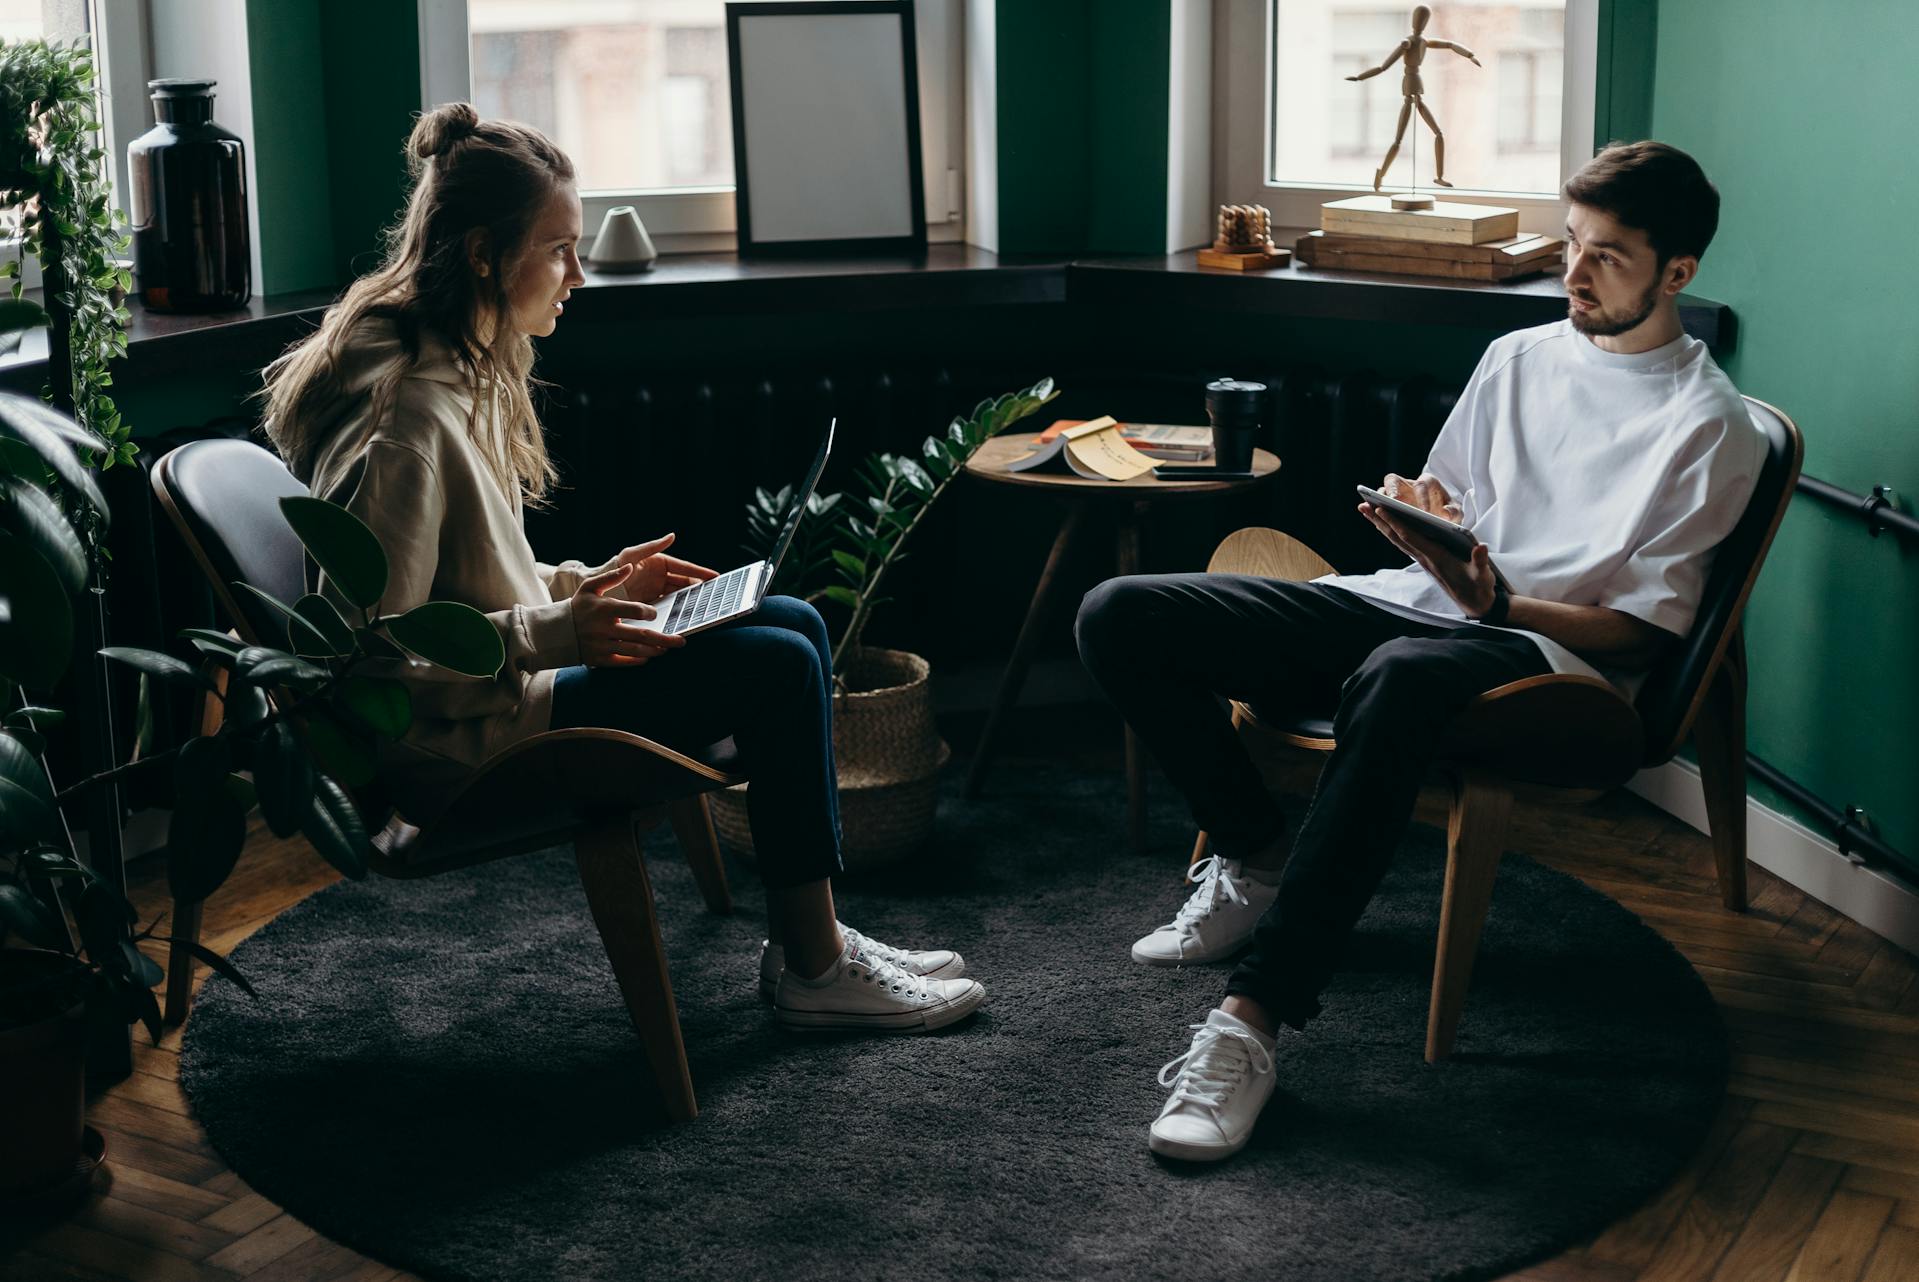 A couple having a conversation at home | Source: Pexels